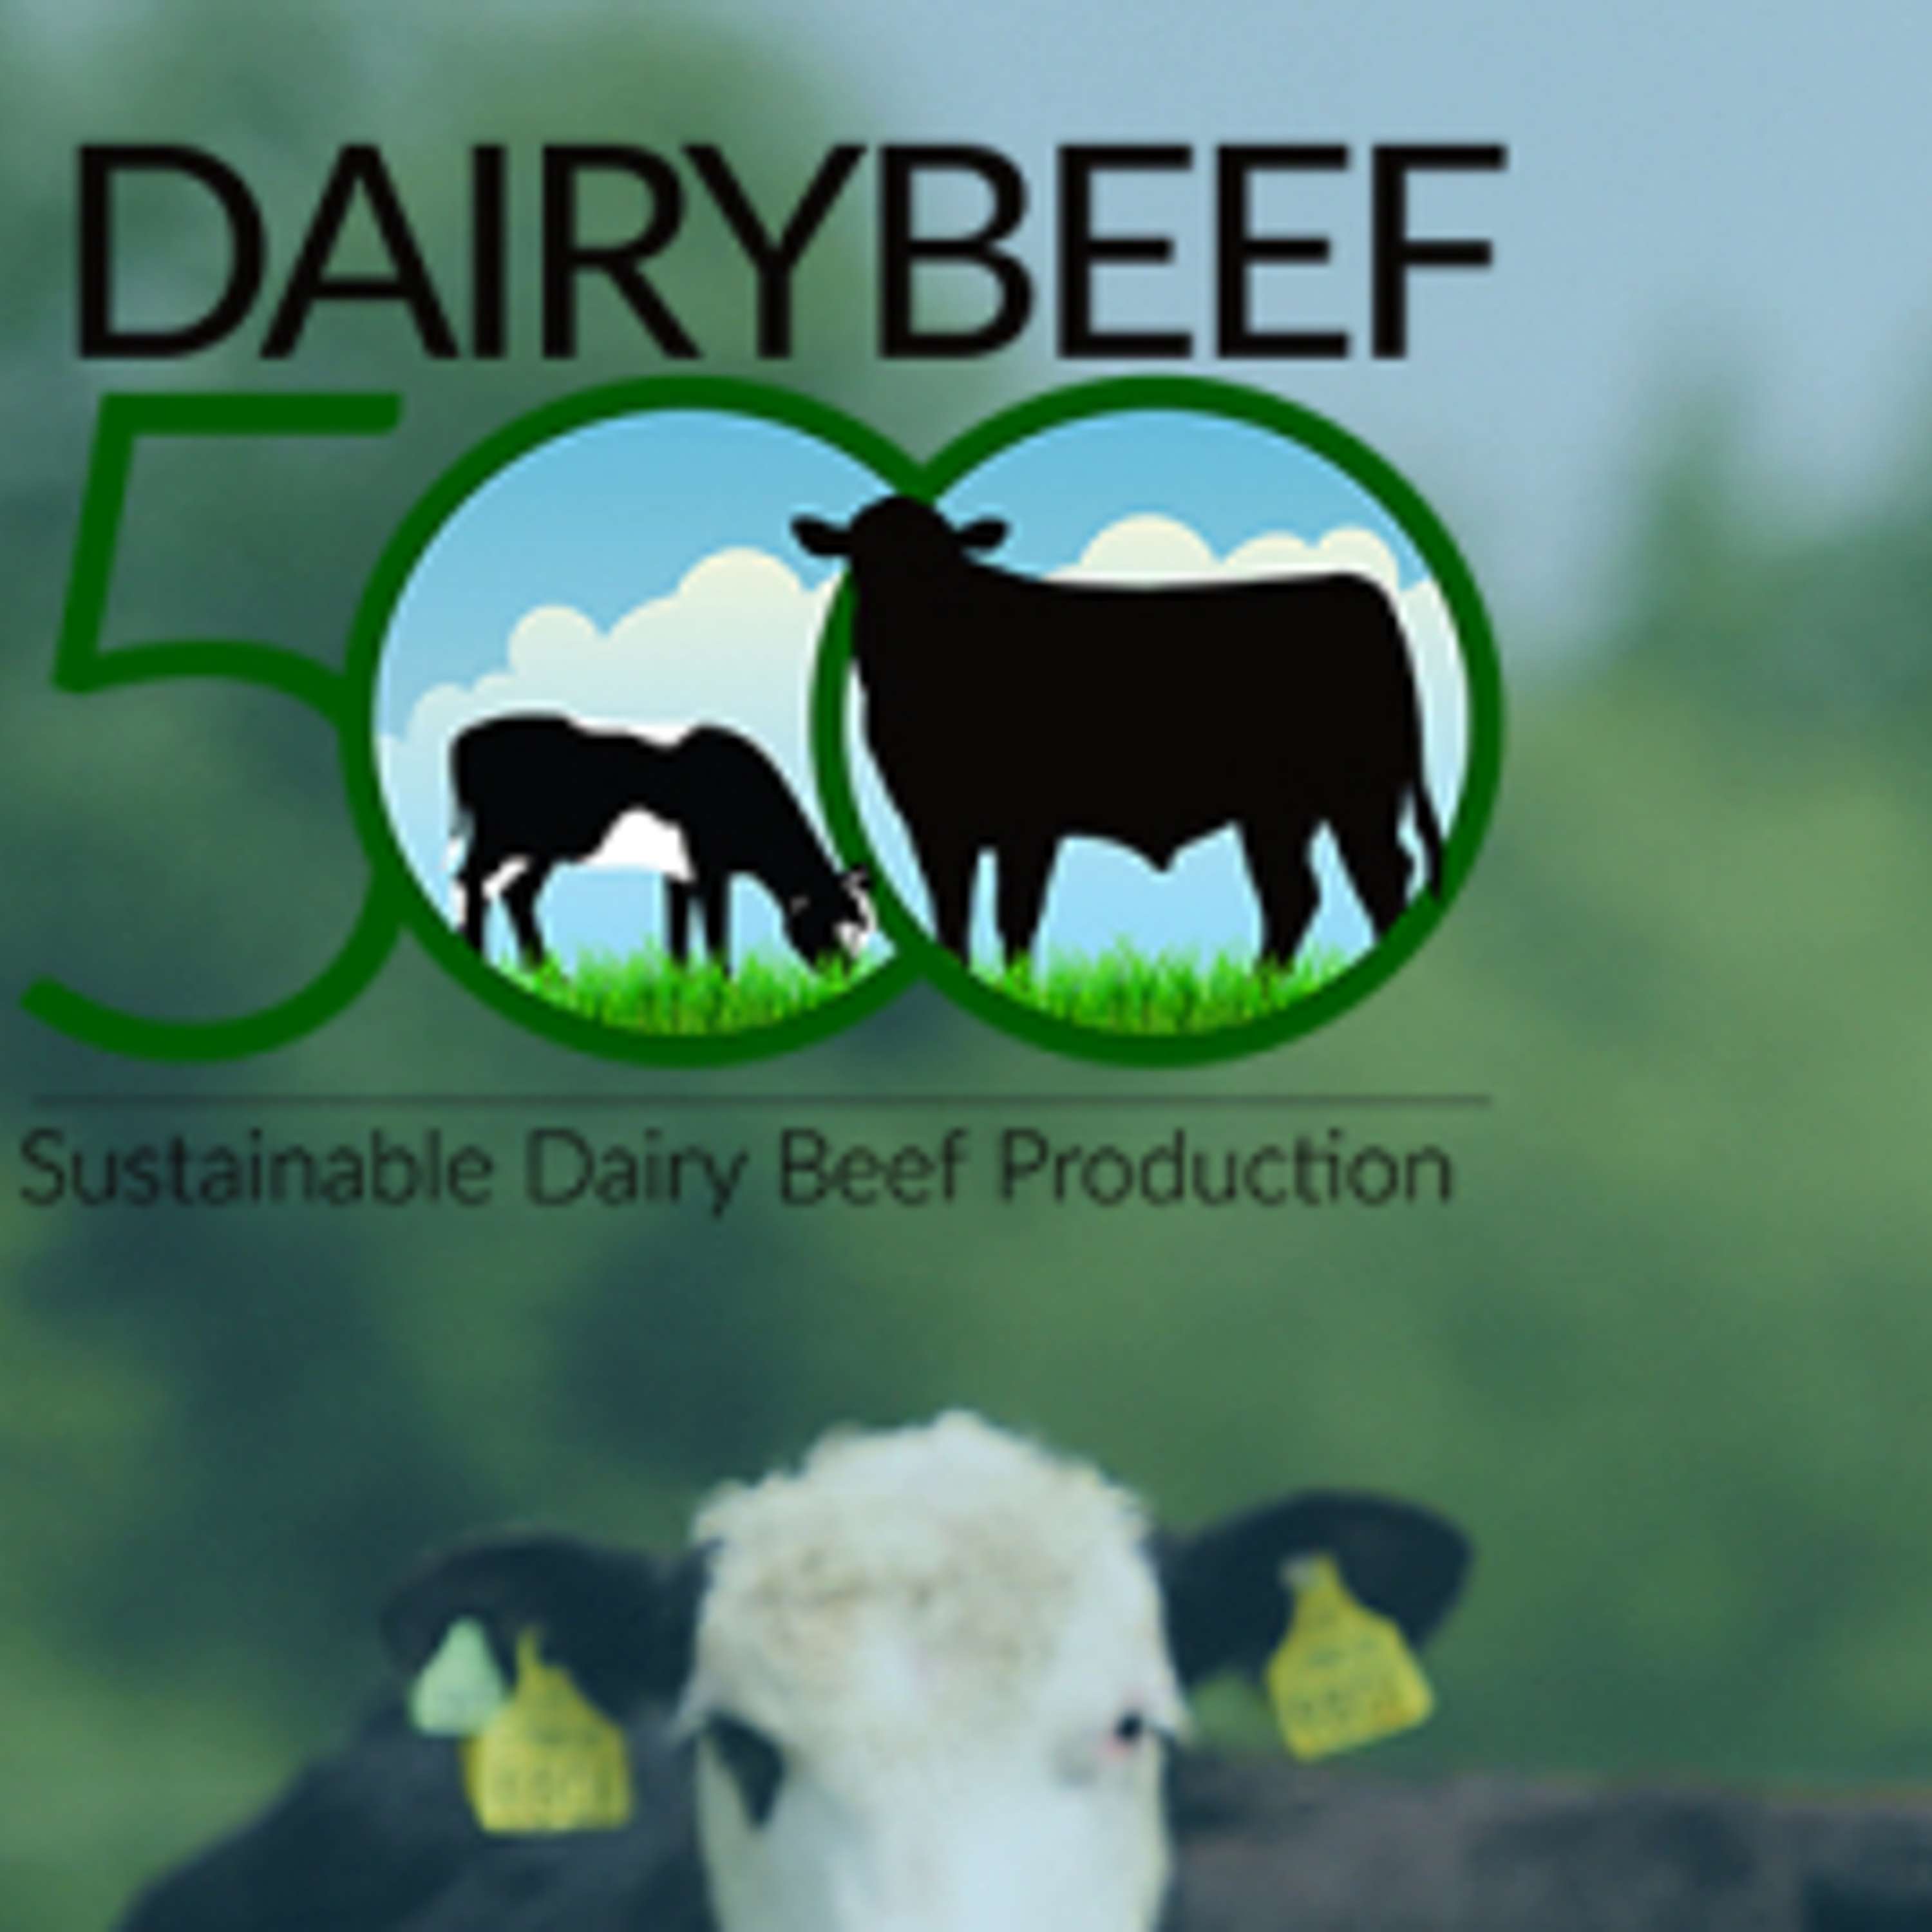 DairyBeef 500 and what it hopes to achieve in the next five years